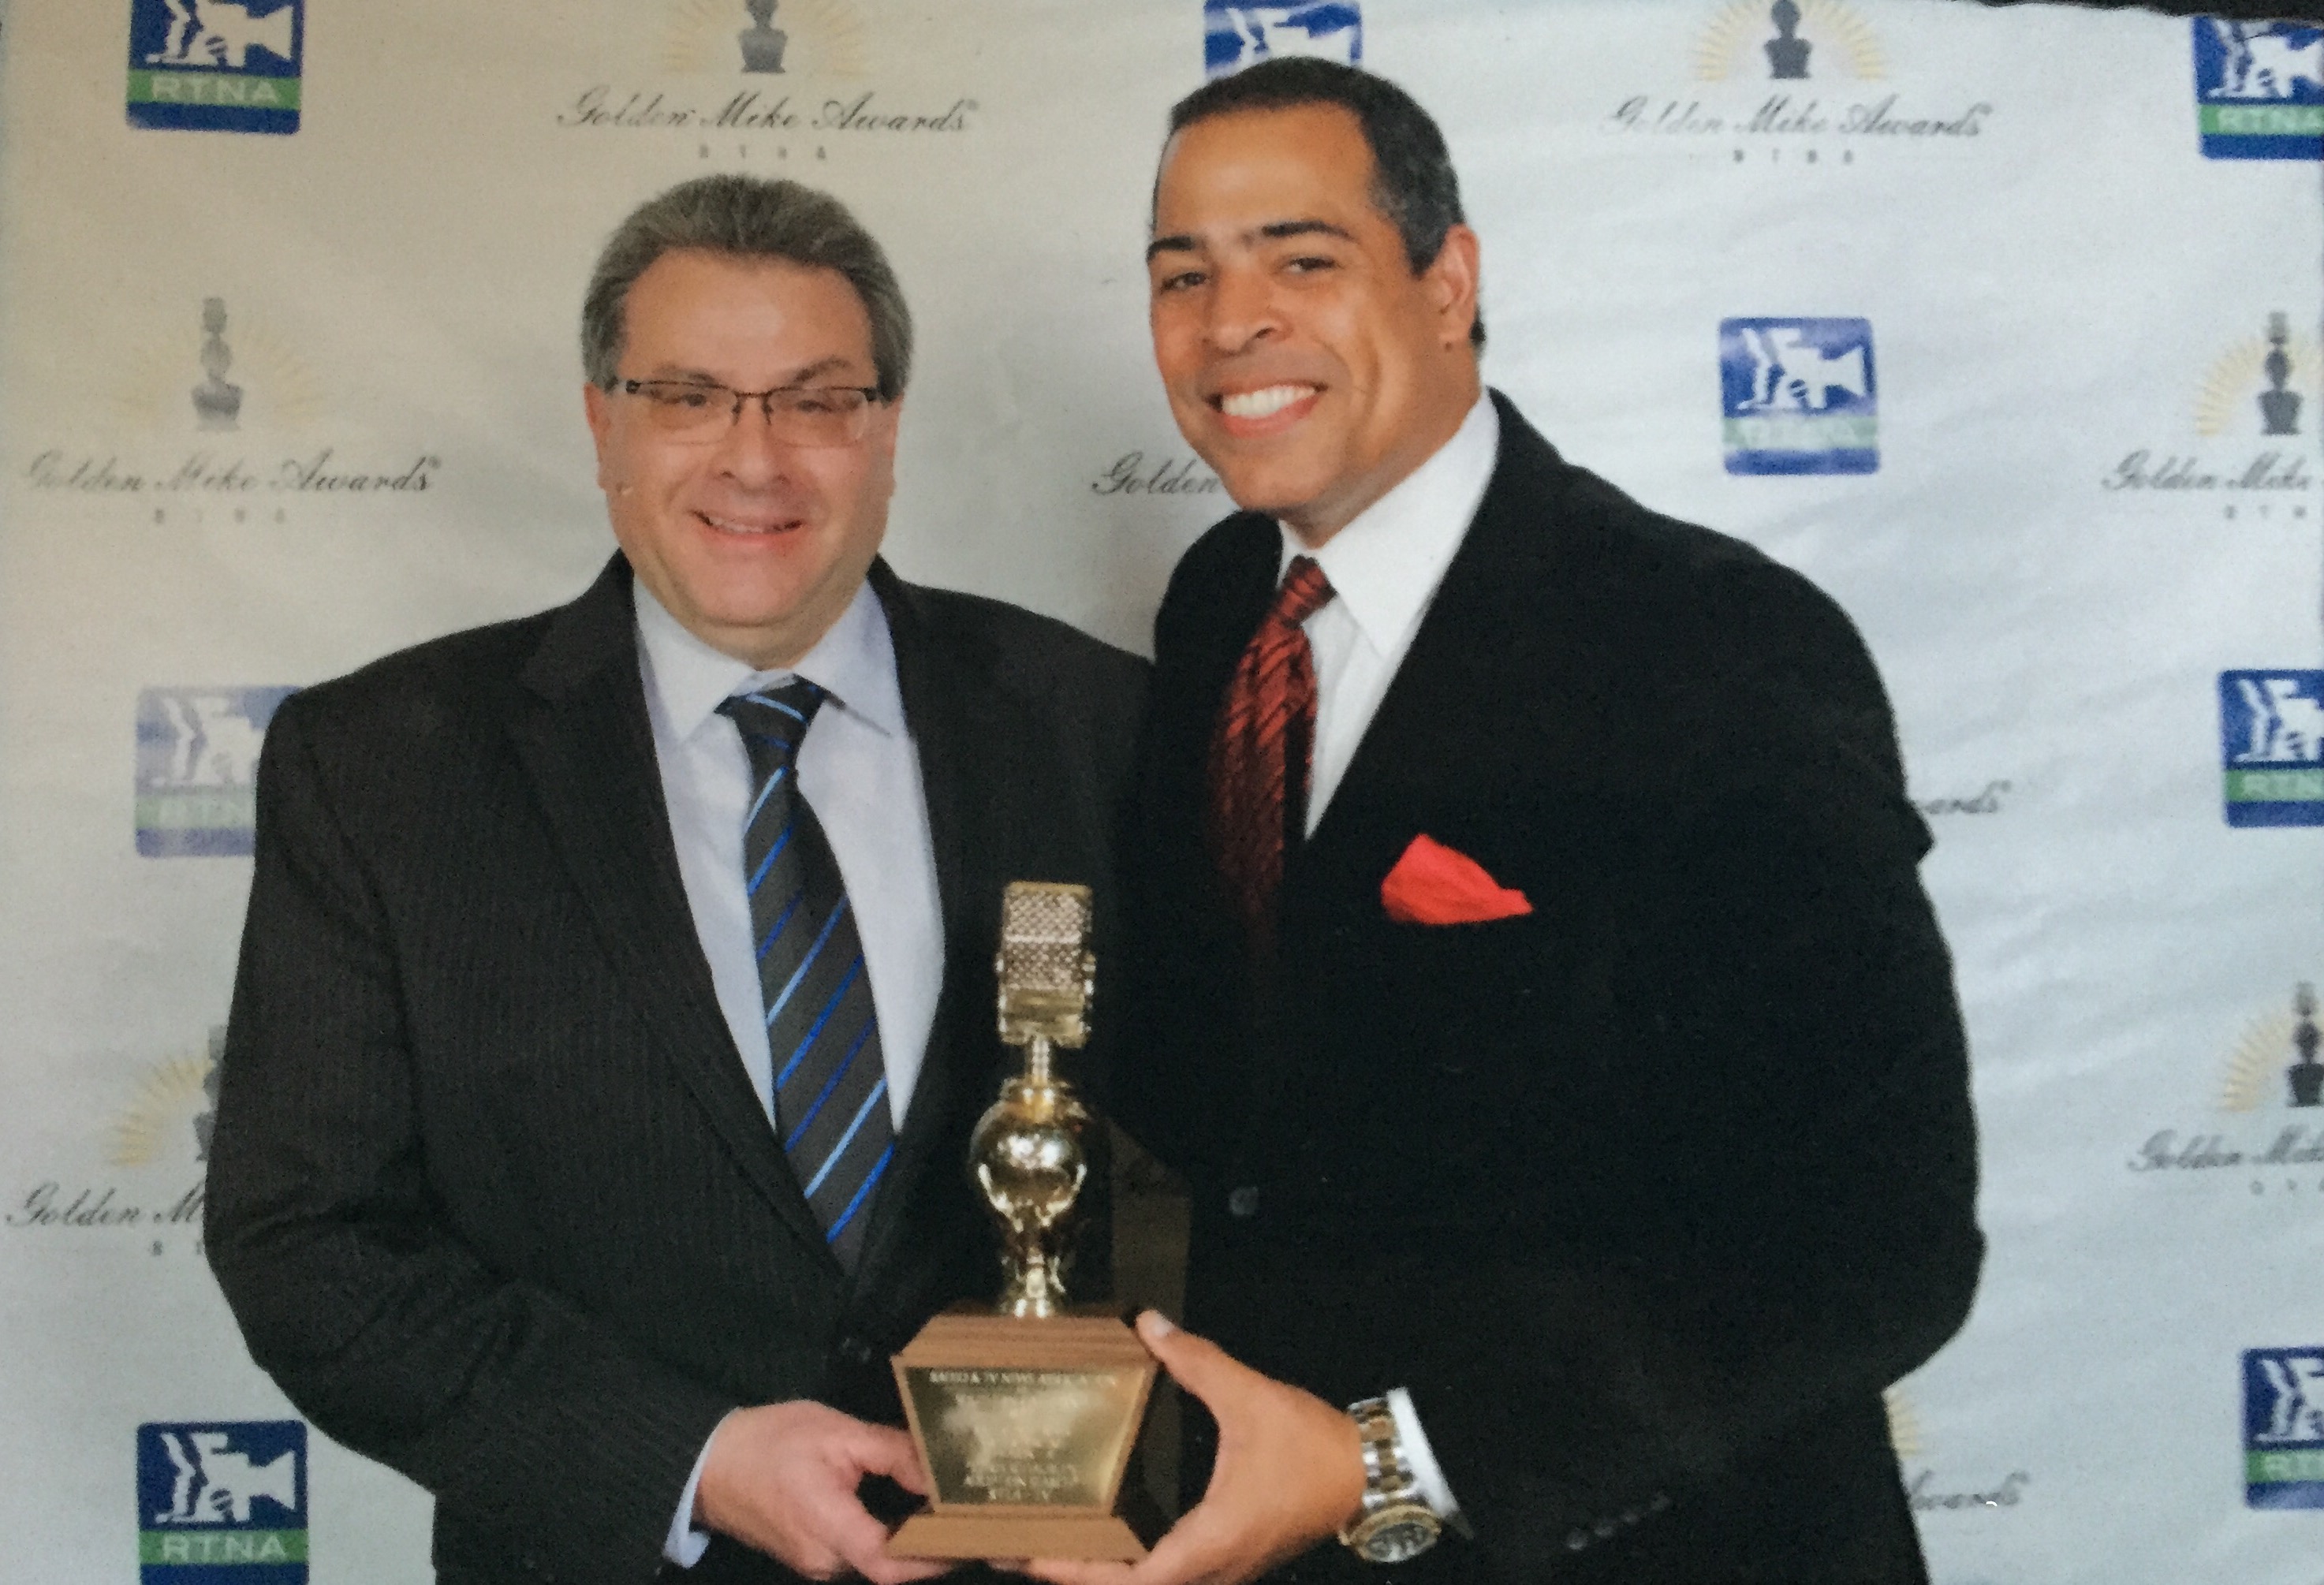 Golden Mike Award given out by the Radio and Television News Association of Southern California for the Chris Schauble Adoption Story